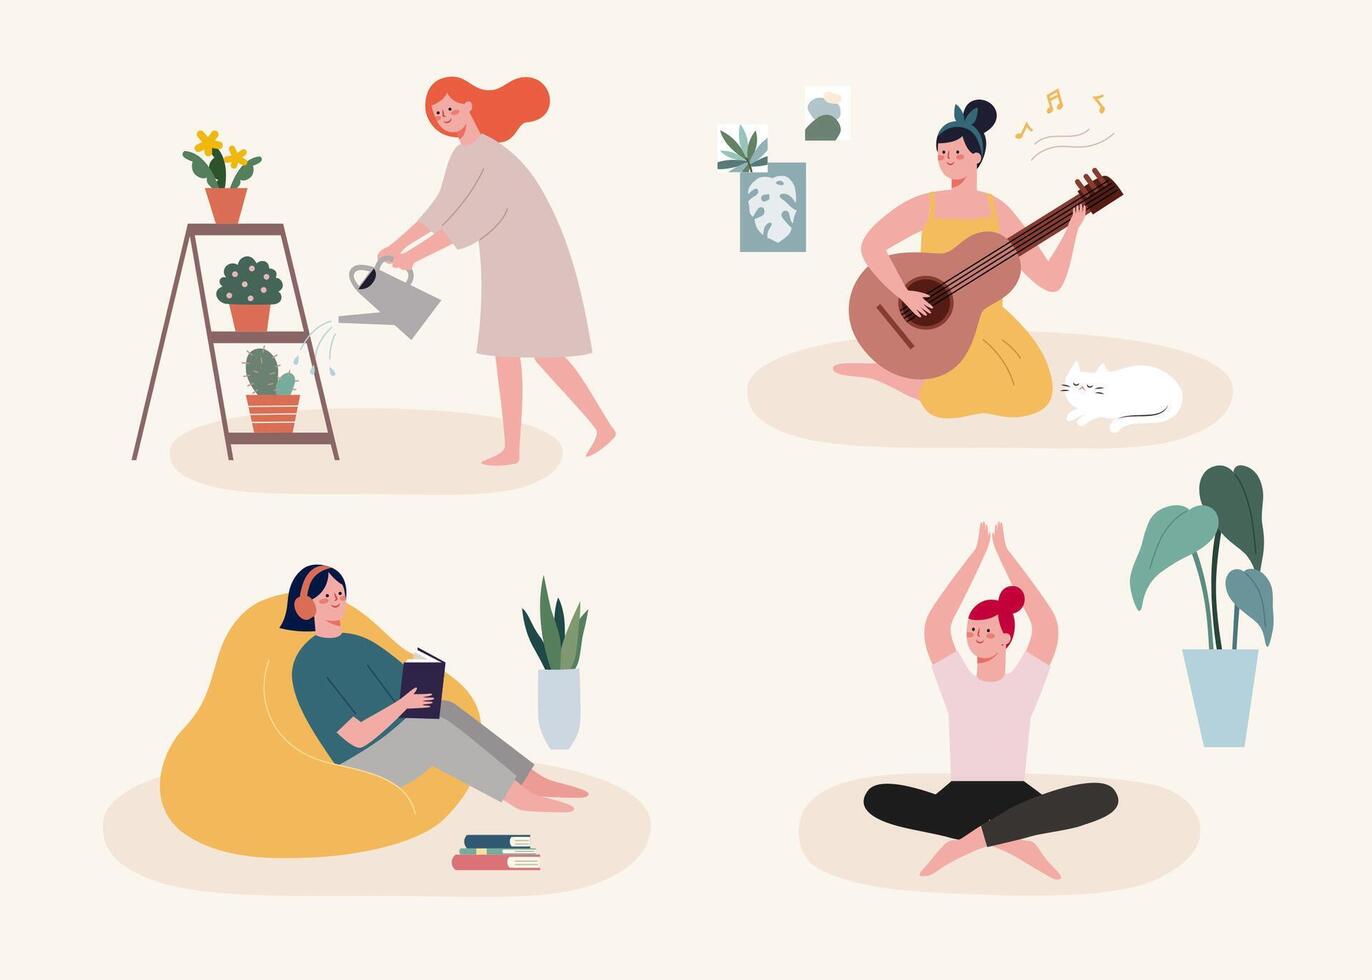 Flat illustration of staying home during quarantine. People doing different activities indoors, including watering plants, playing guitar, reading books, doing yoga. vector